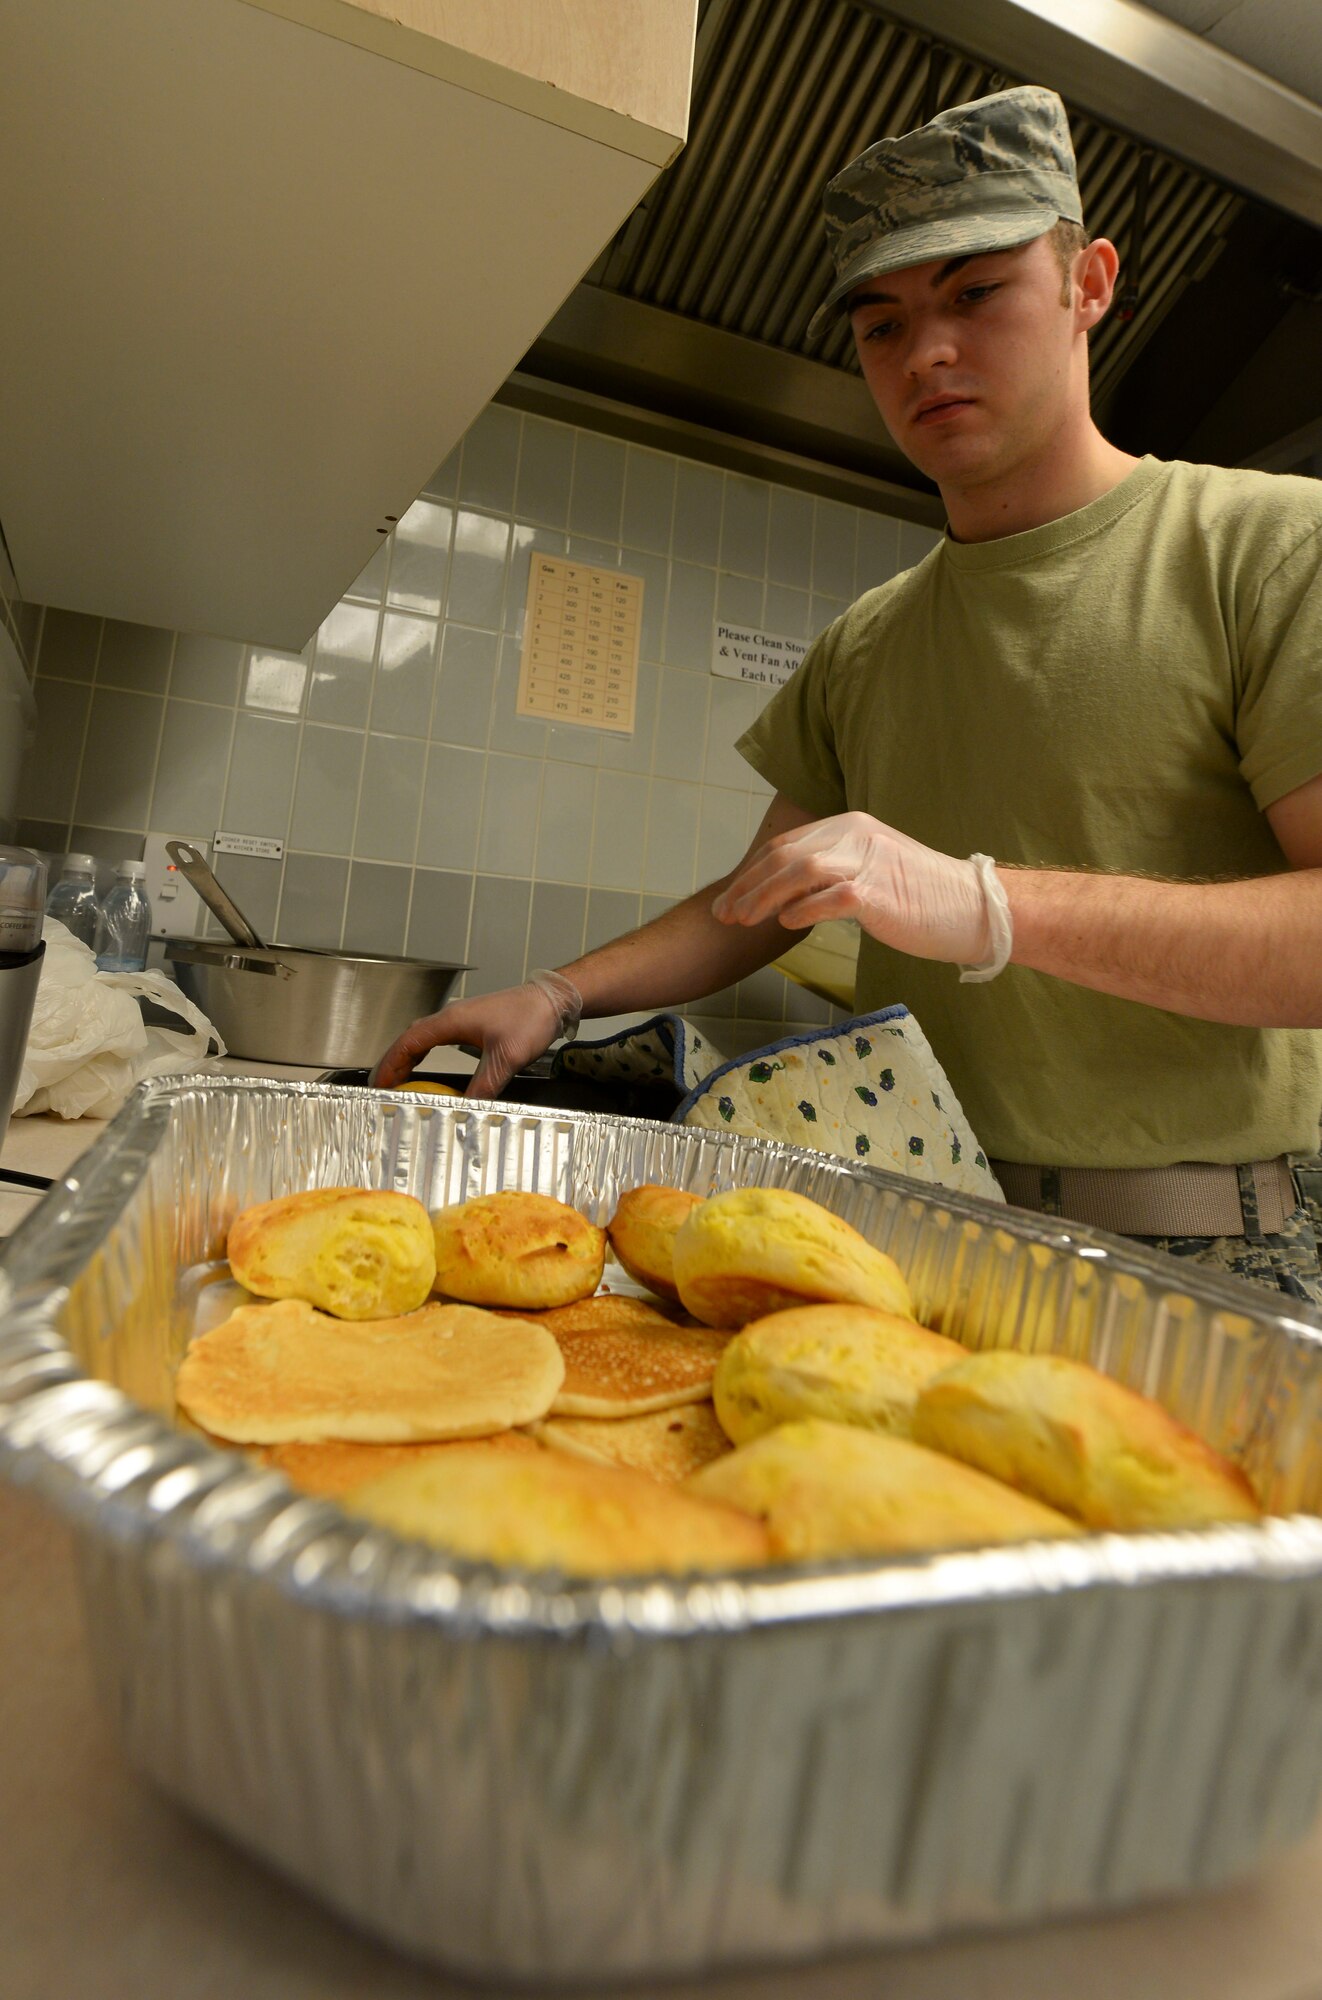 U.S. Air Force Airman 1st Class Austin Gembeck, 100th Maintenance Squadron aerospace ground equipment apprentice, places biscuits in the base chapel March 21, 2017, on RAF Mildenhall, England. Airmen in the ranks from airman basic to senior airman were invited to the base chapel to enjoy a free breakfast, compliments of the Airmen Committed to Excellence council. (U.S. Air Force photo by Staff Sgt. Micaiah Anthony)